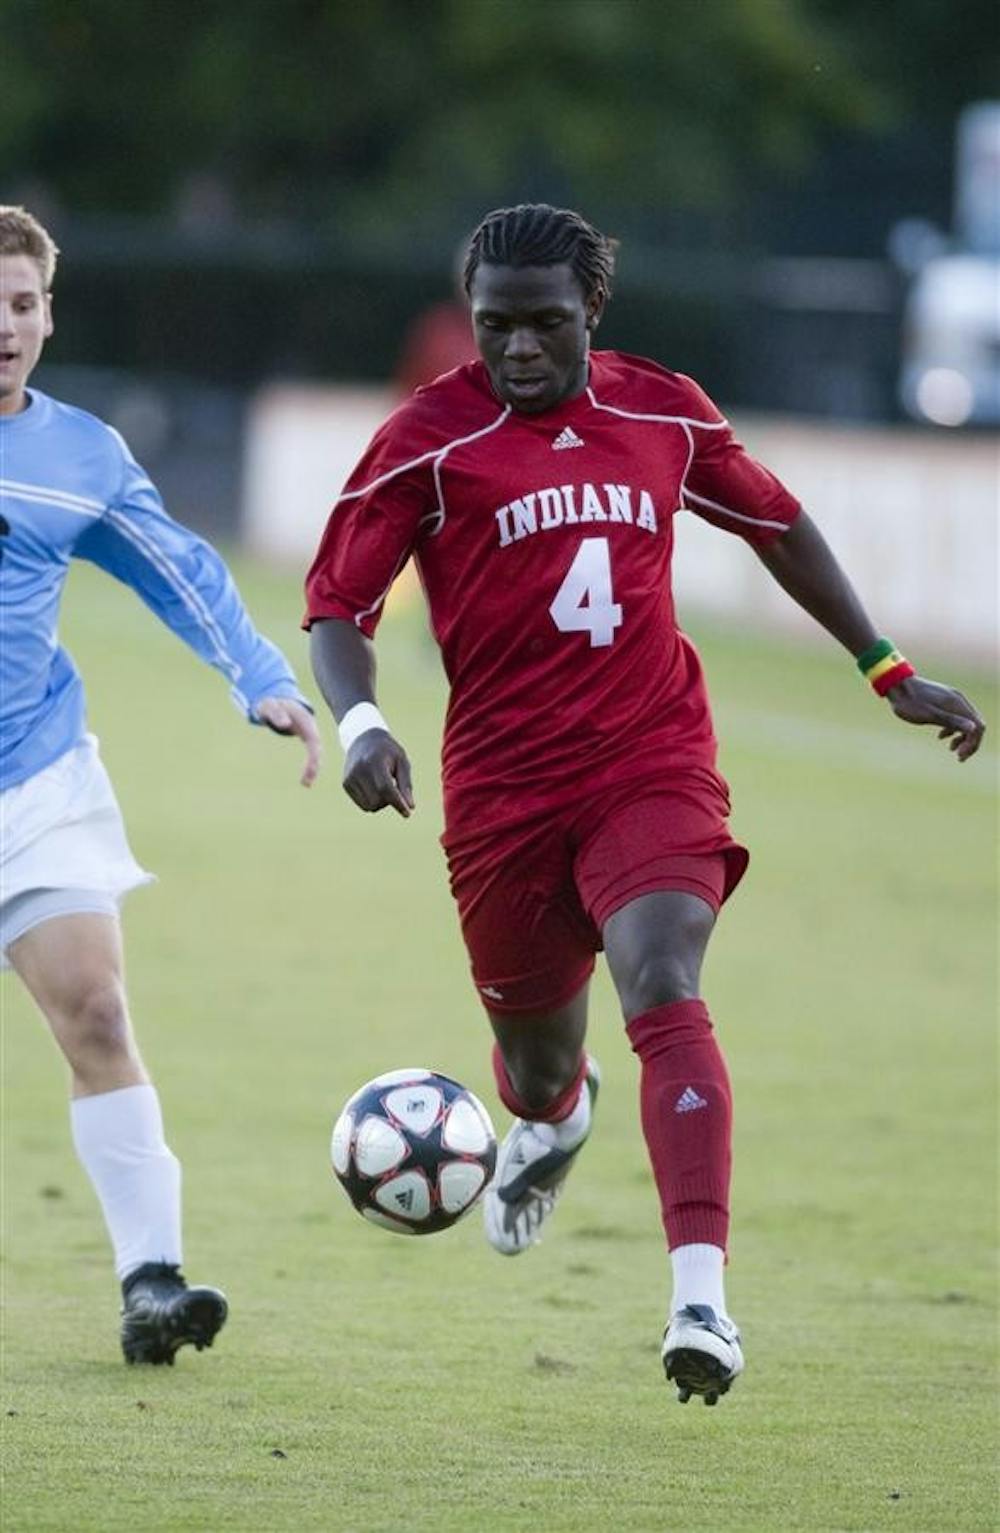 Ofori Sarkodie dribbles the ball downfield against a Butler defender Wednesday, Oct. 7 at Bill Armstrong Stadium.